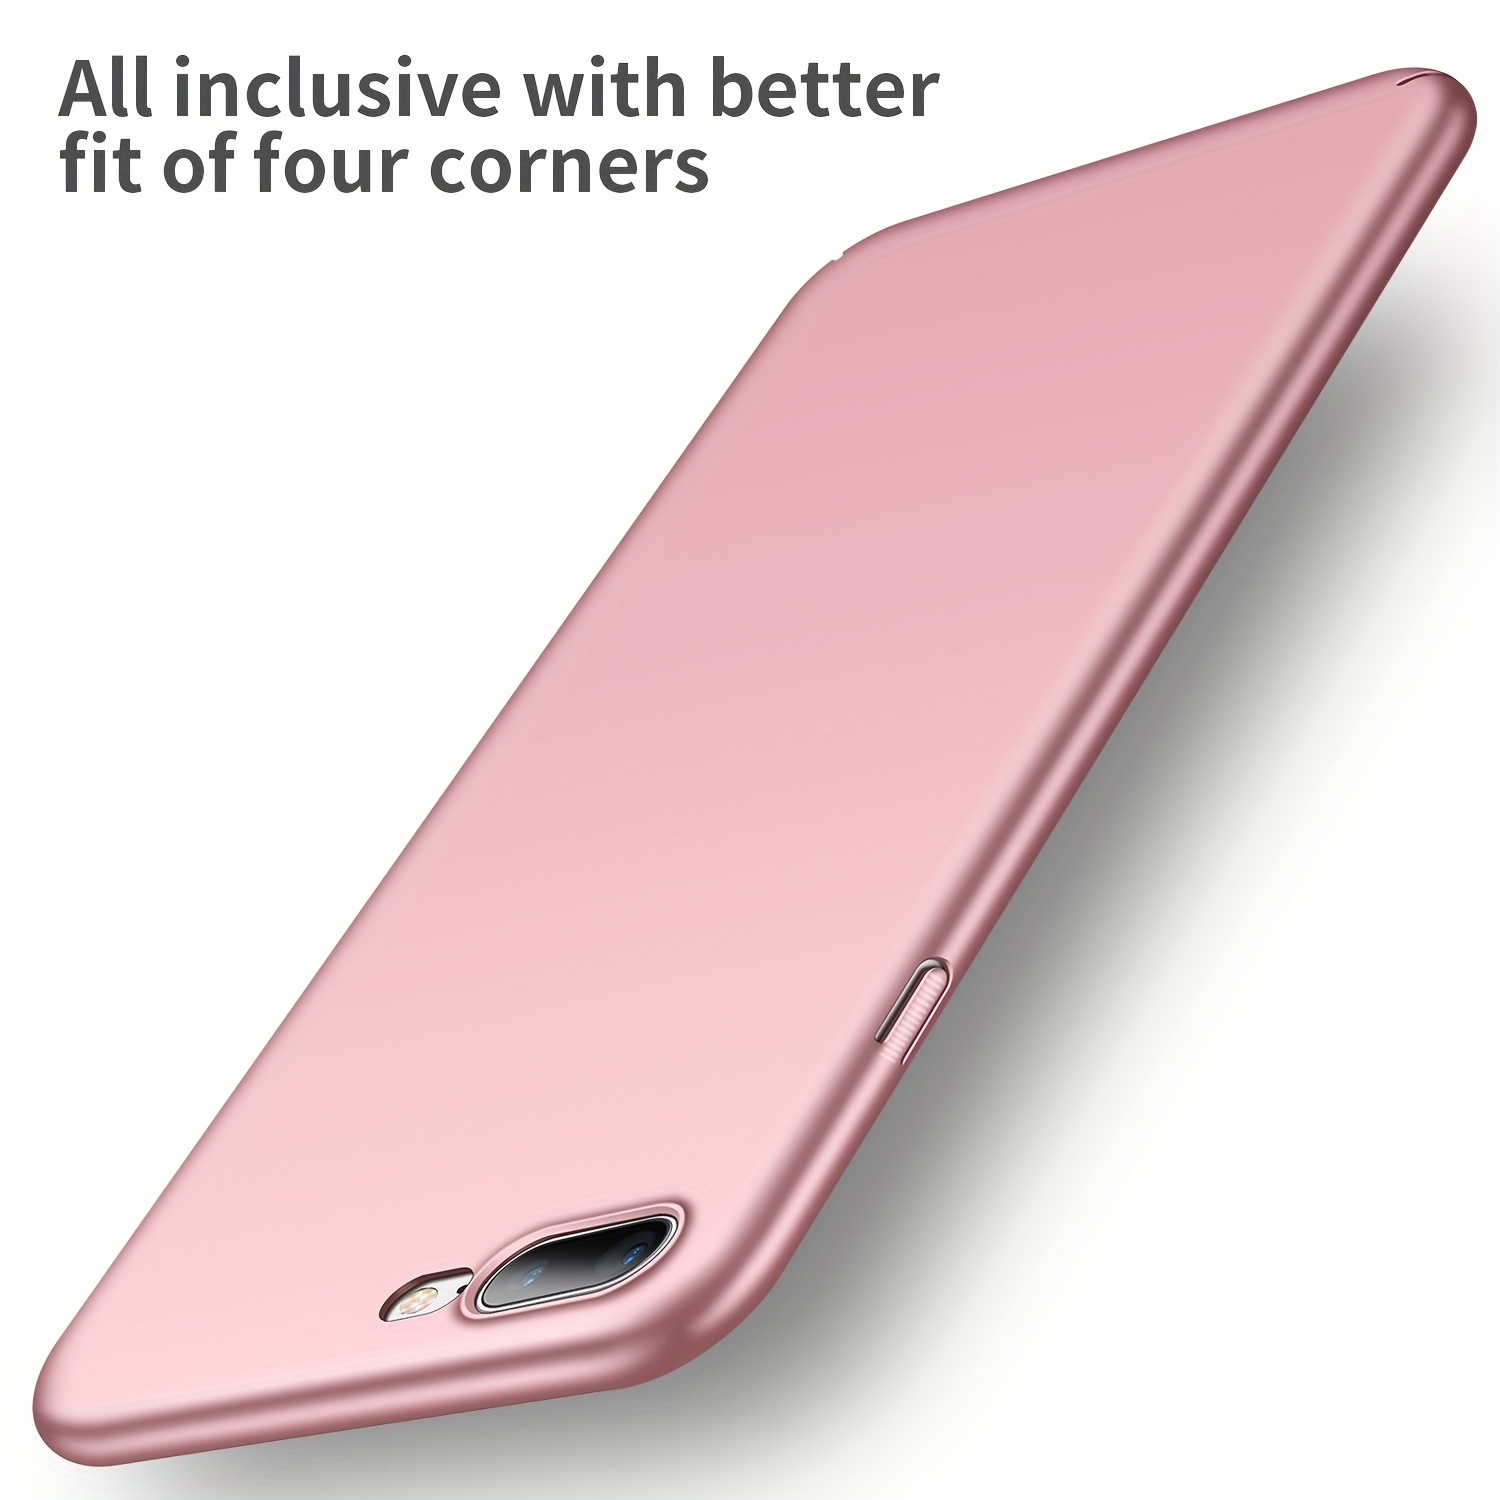 Thin pink iPhone 7/8 Plus case